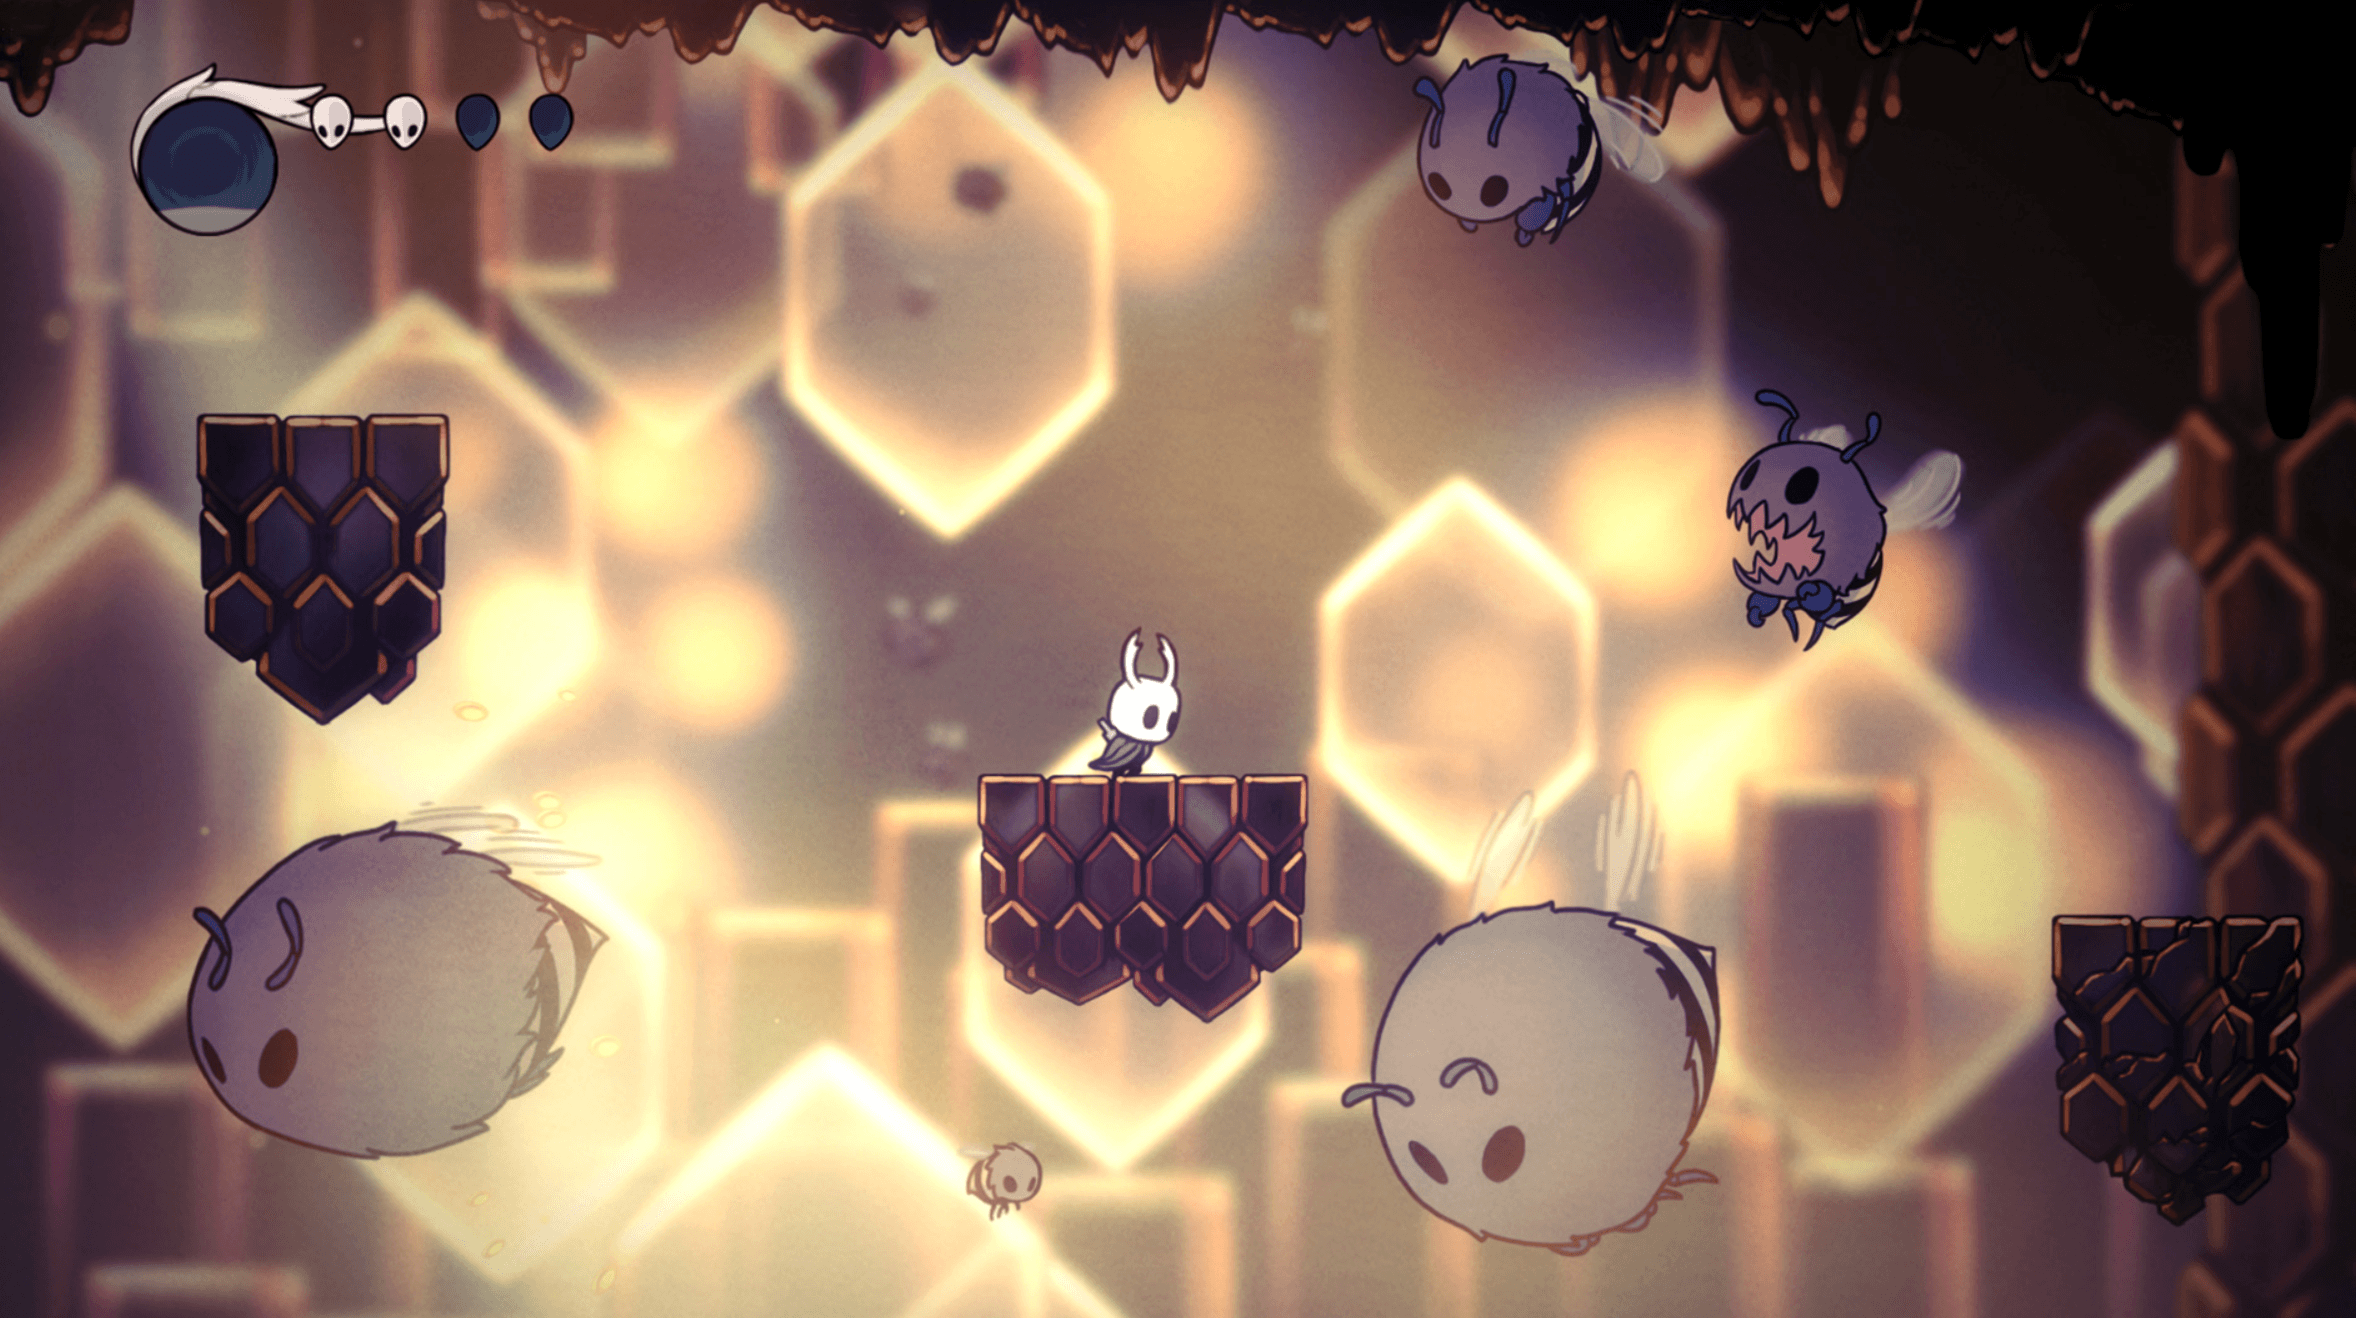 Hollow Knight is super silky on Switch